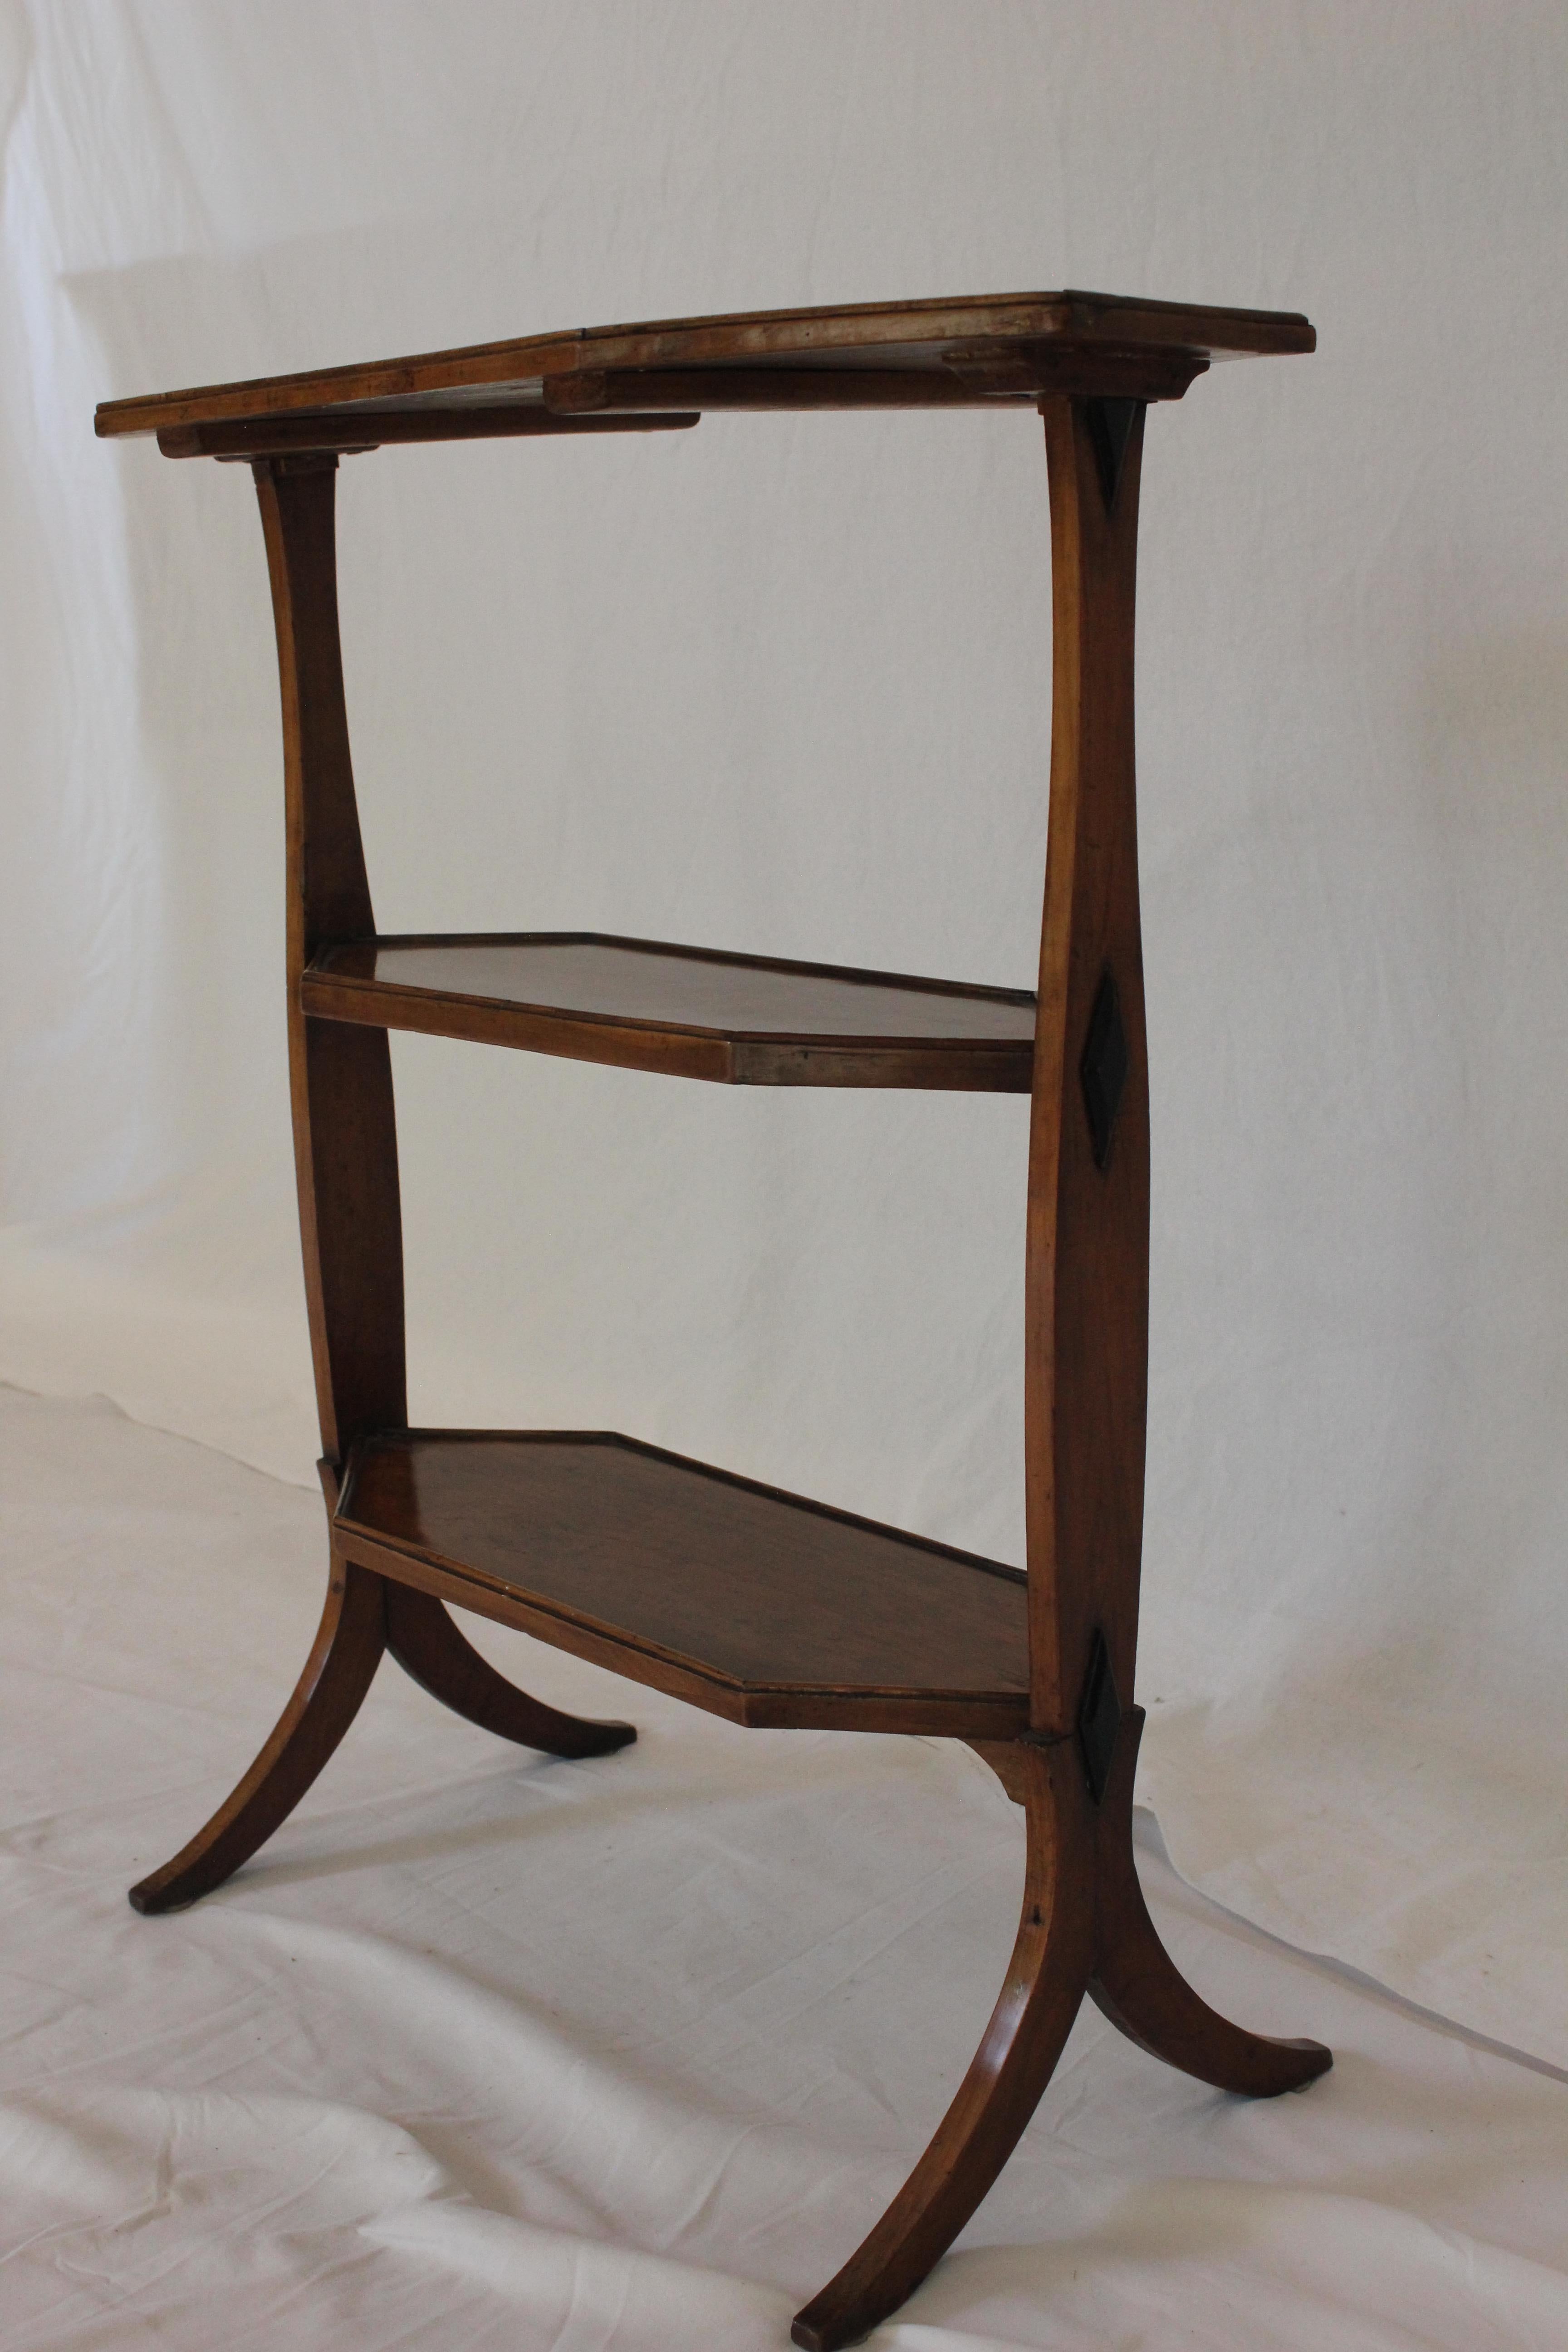 Antique French Provincial Fruitwood Side Table / Display Stand Late 18th C For Sale 1